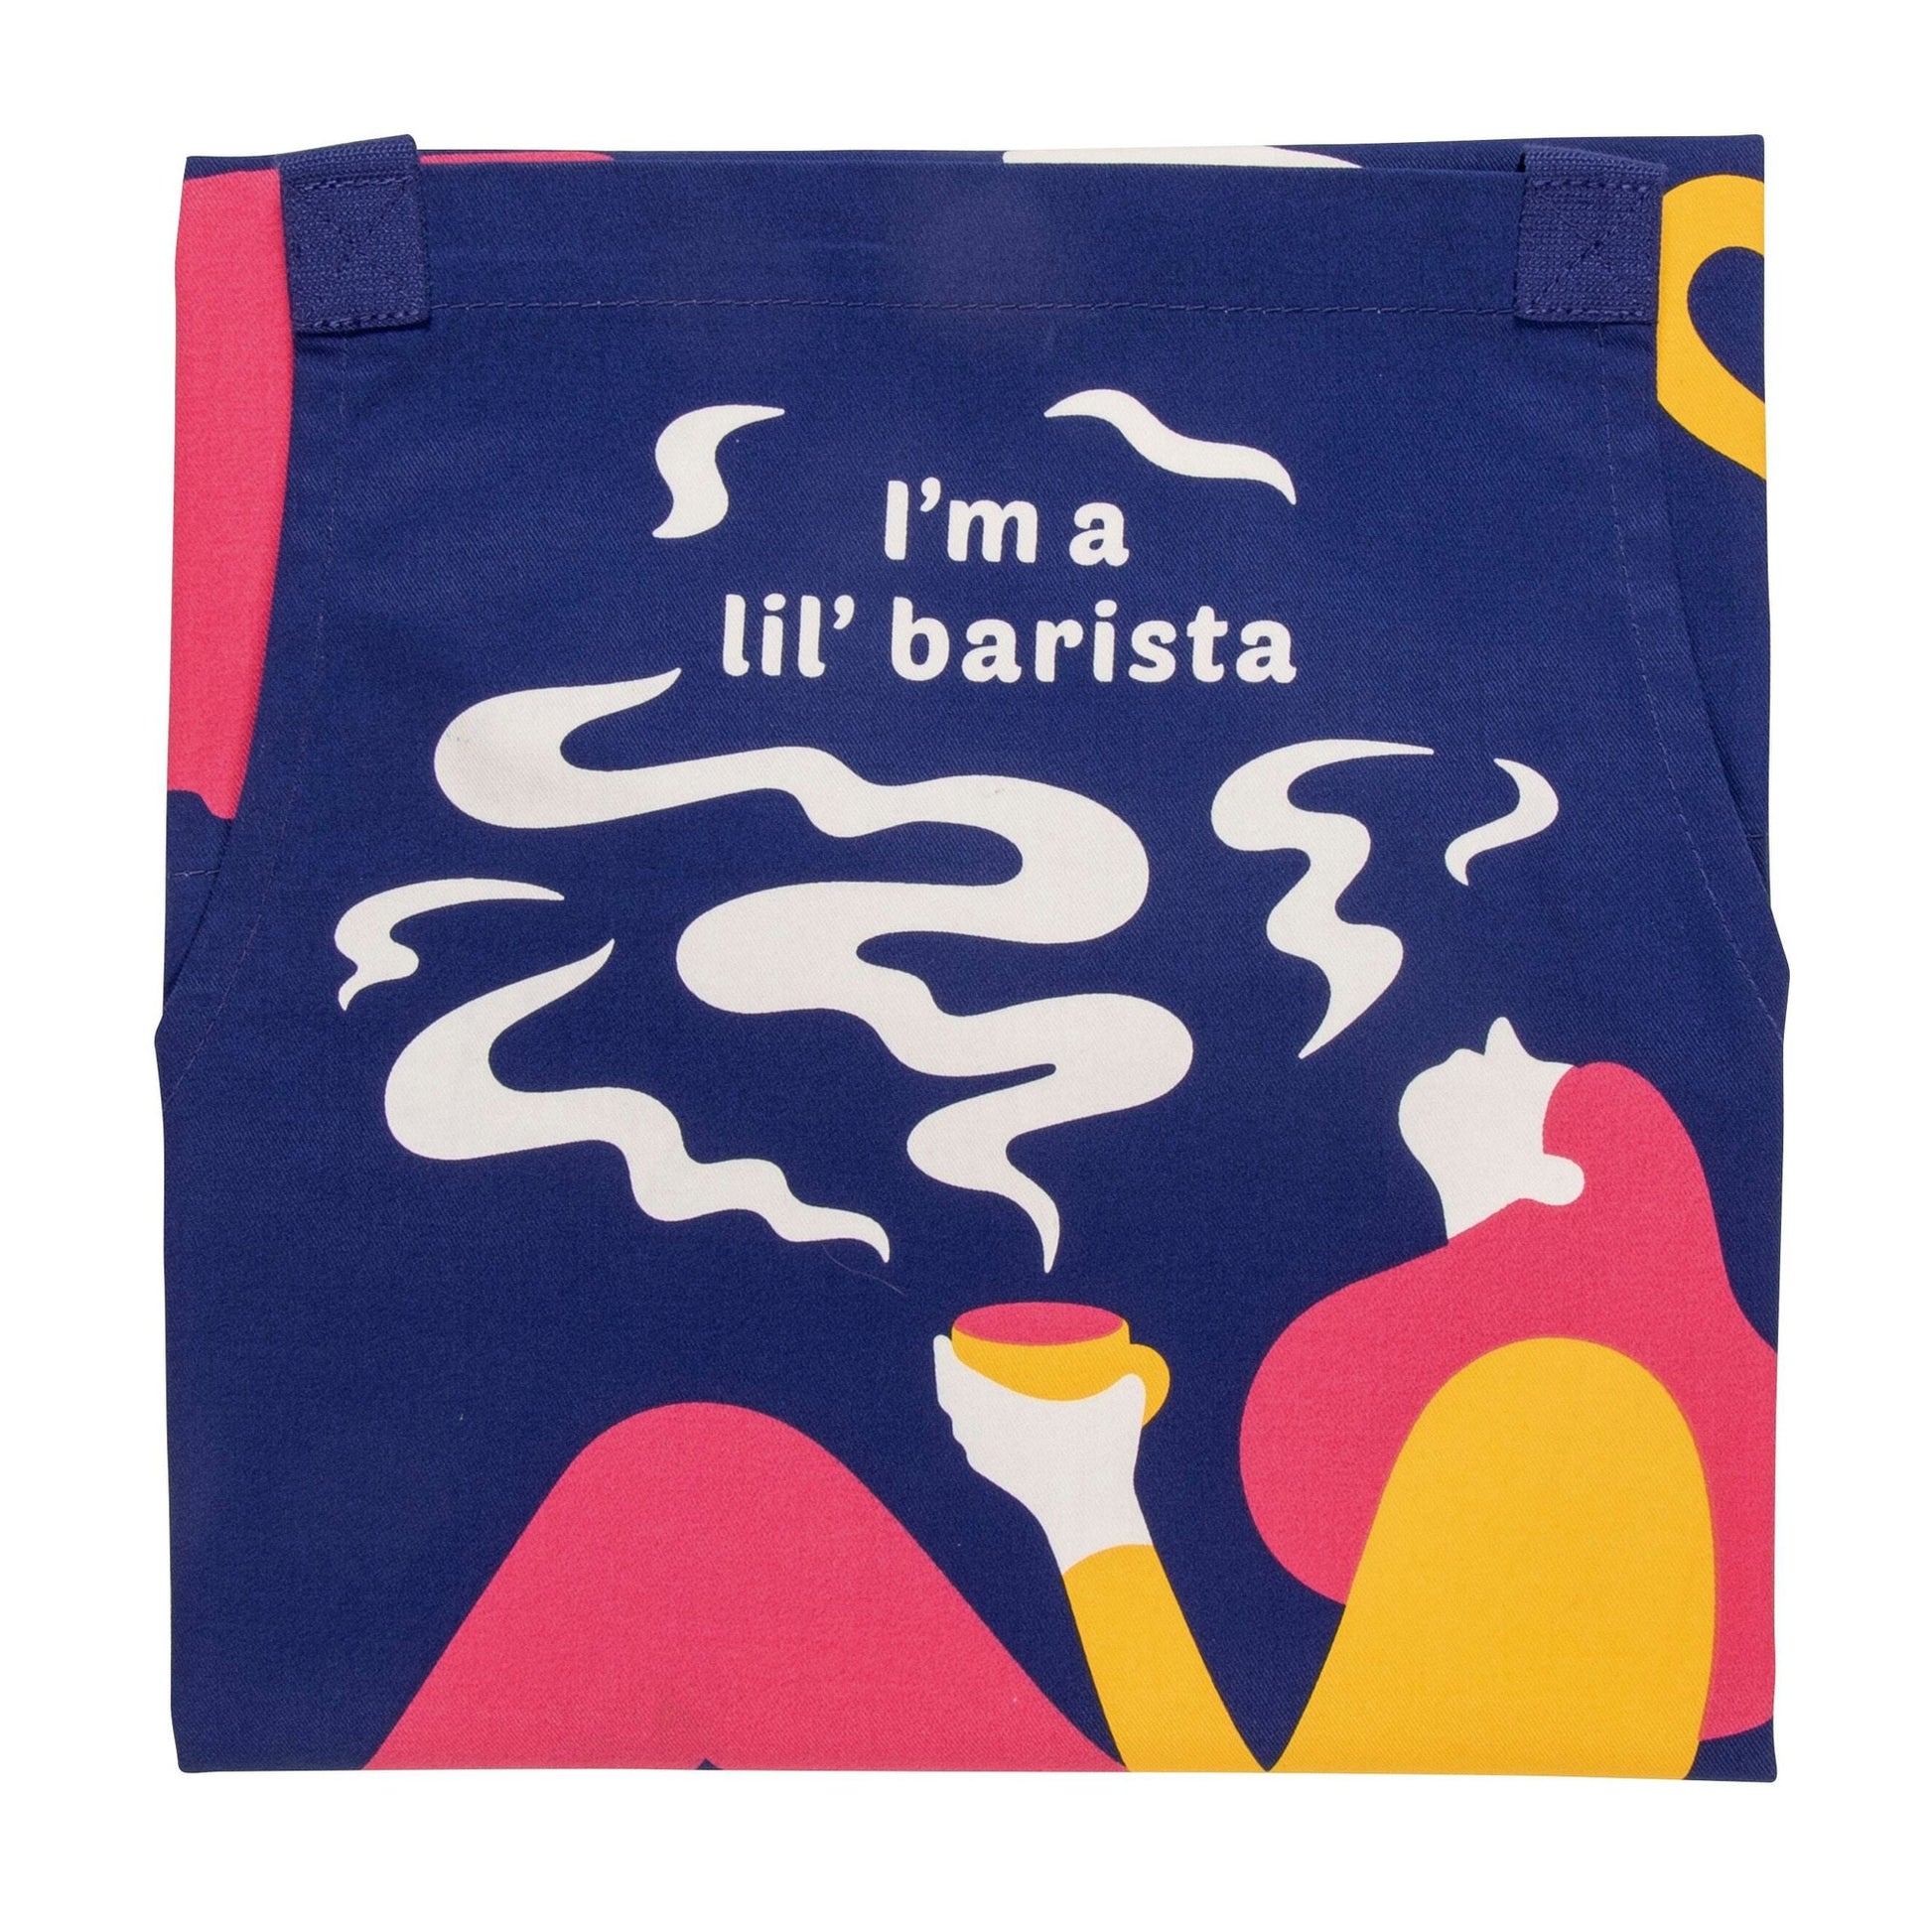 I'm A Lil' Barista Funny Cooking and Coffeemaking Apron Unisex 2 Pockets Adjustable Strap 100% Cotton